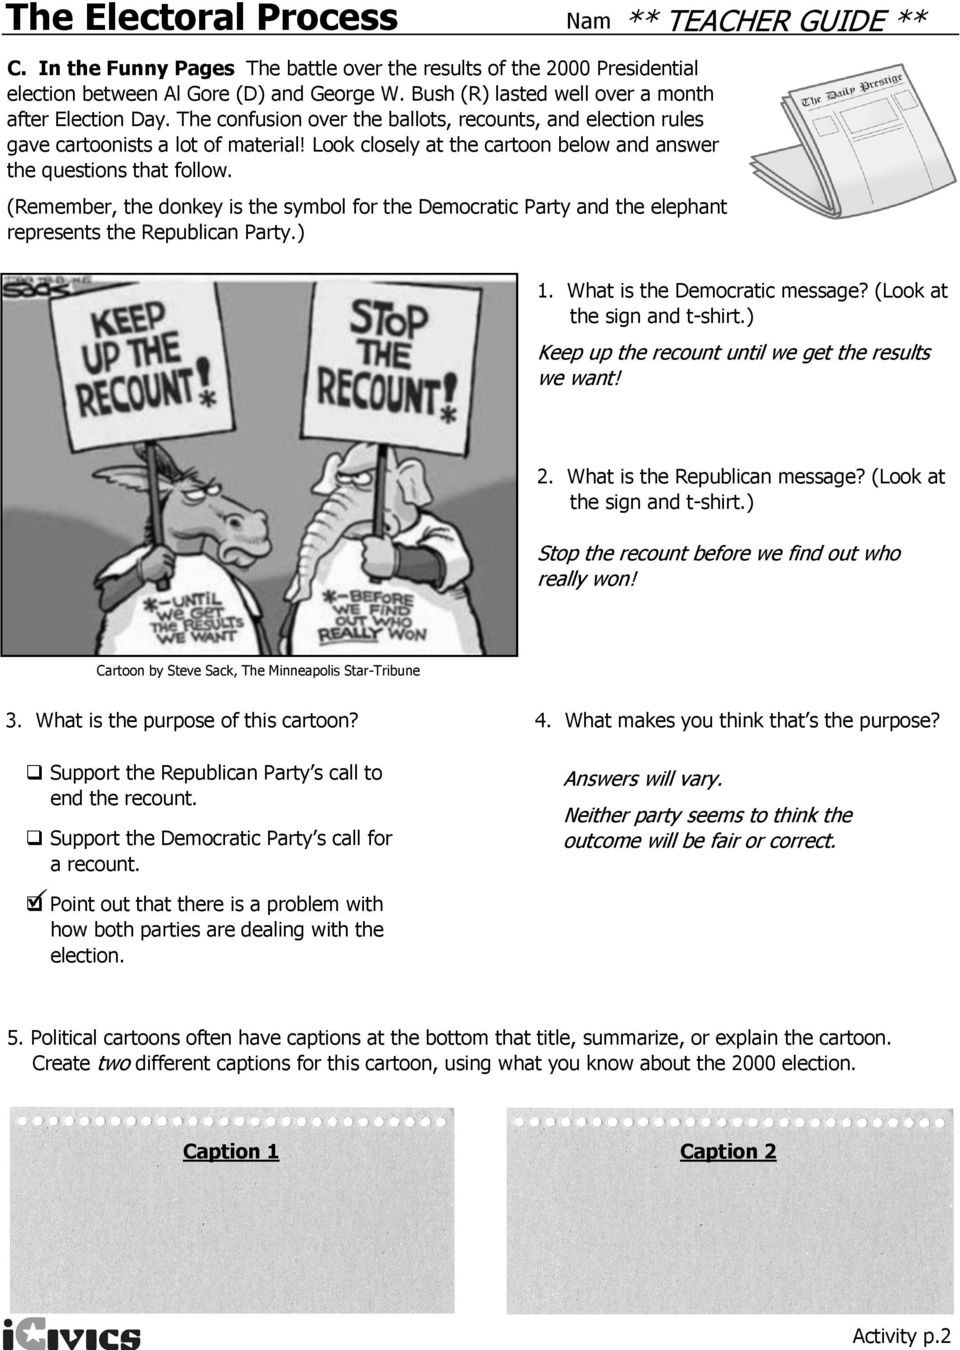 The Electoral Process Worksheet Answers the Electoral Process Step by Step the Worksheet Activity